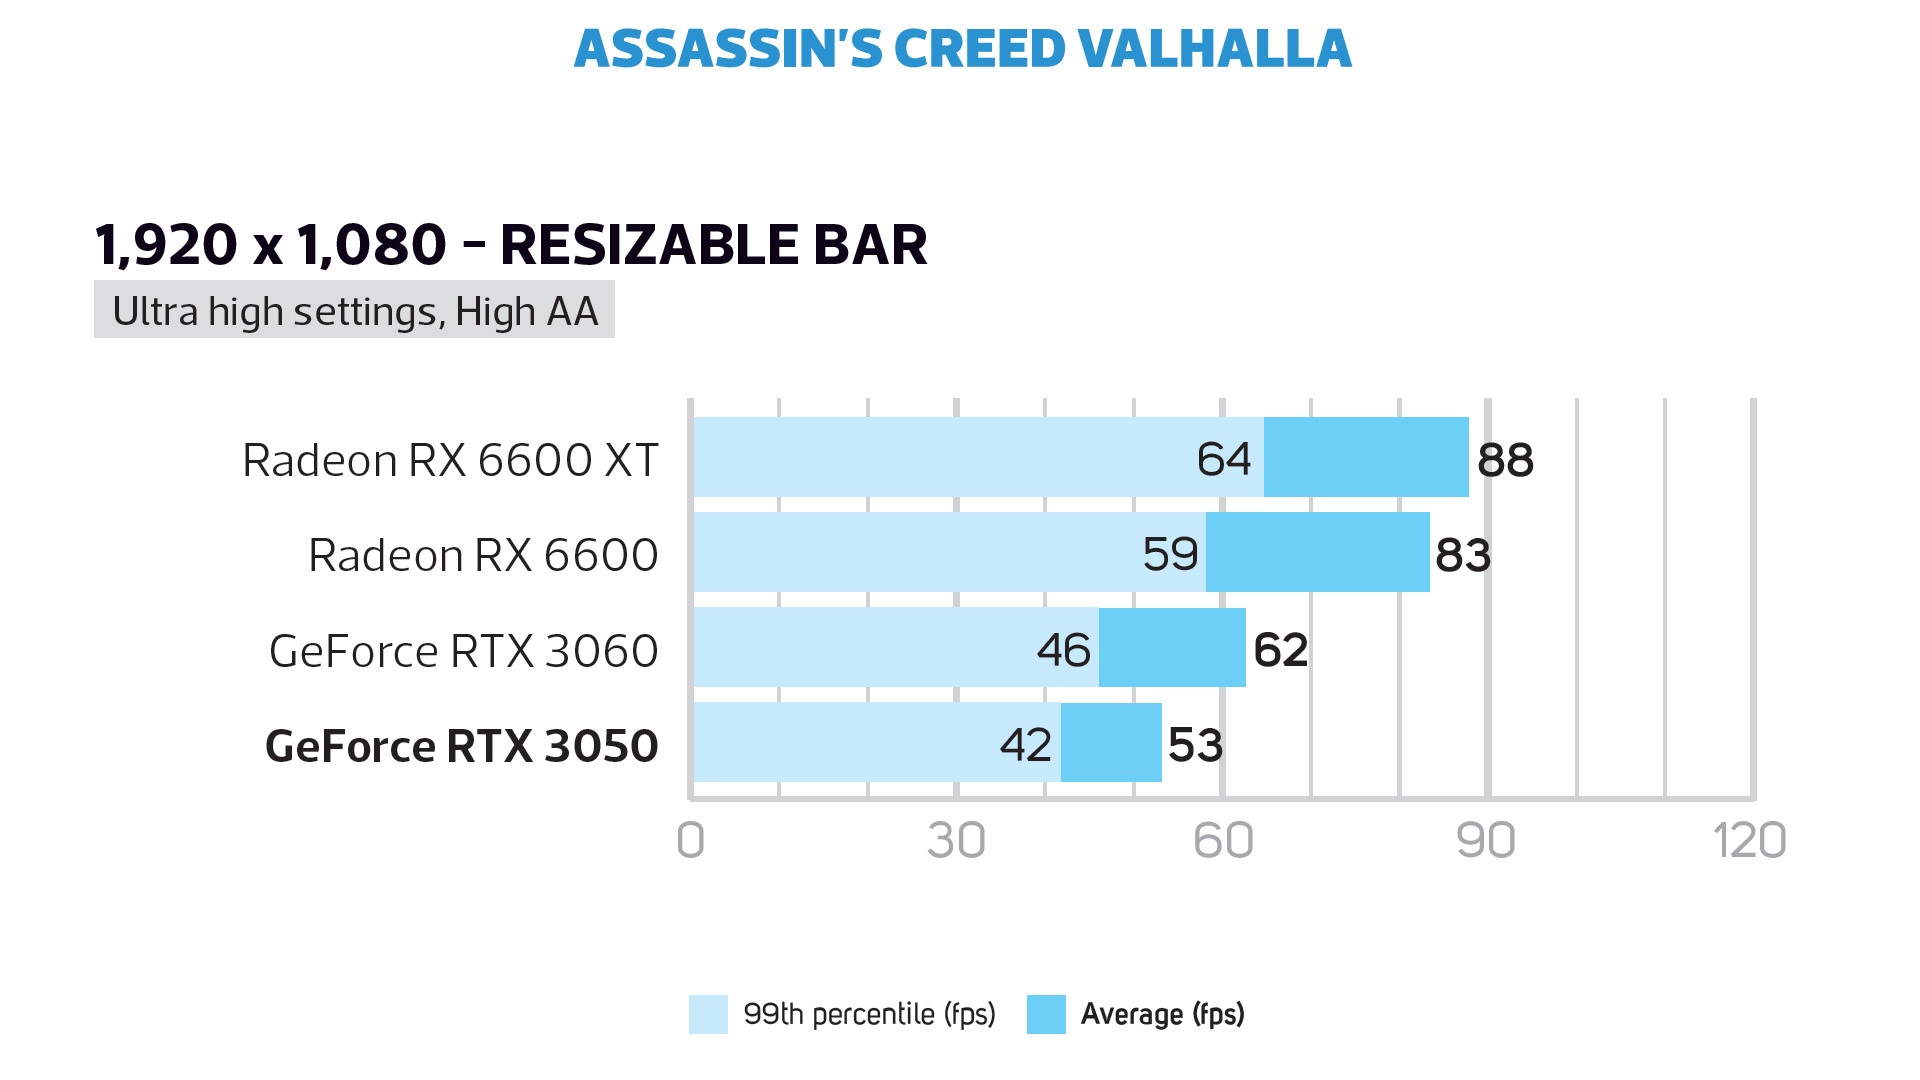 GeForce RTX 3050 1080p Assassin's Creed frame rate